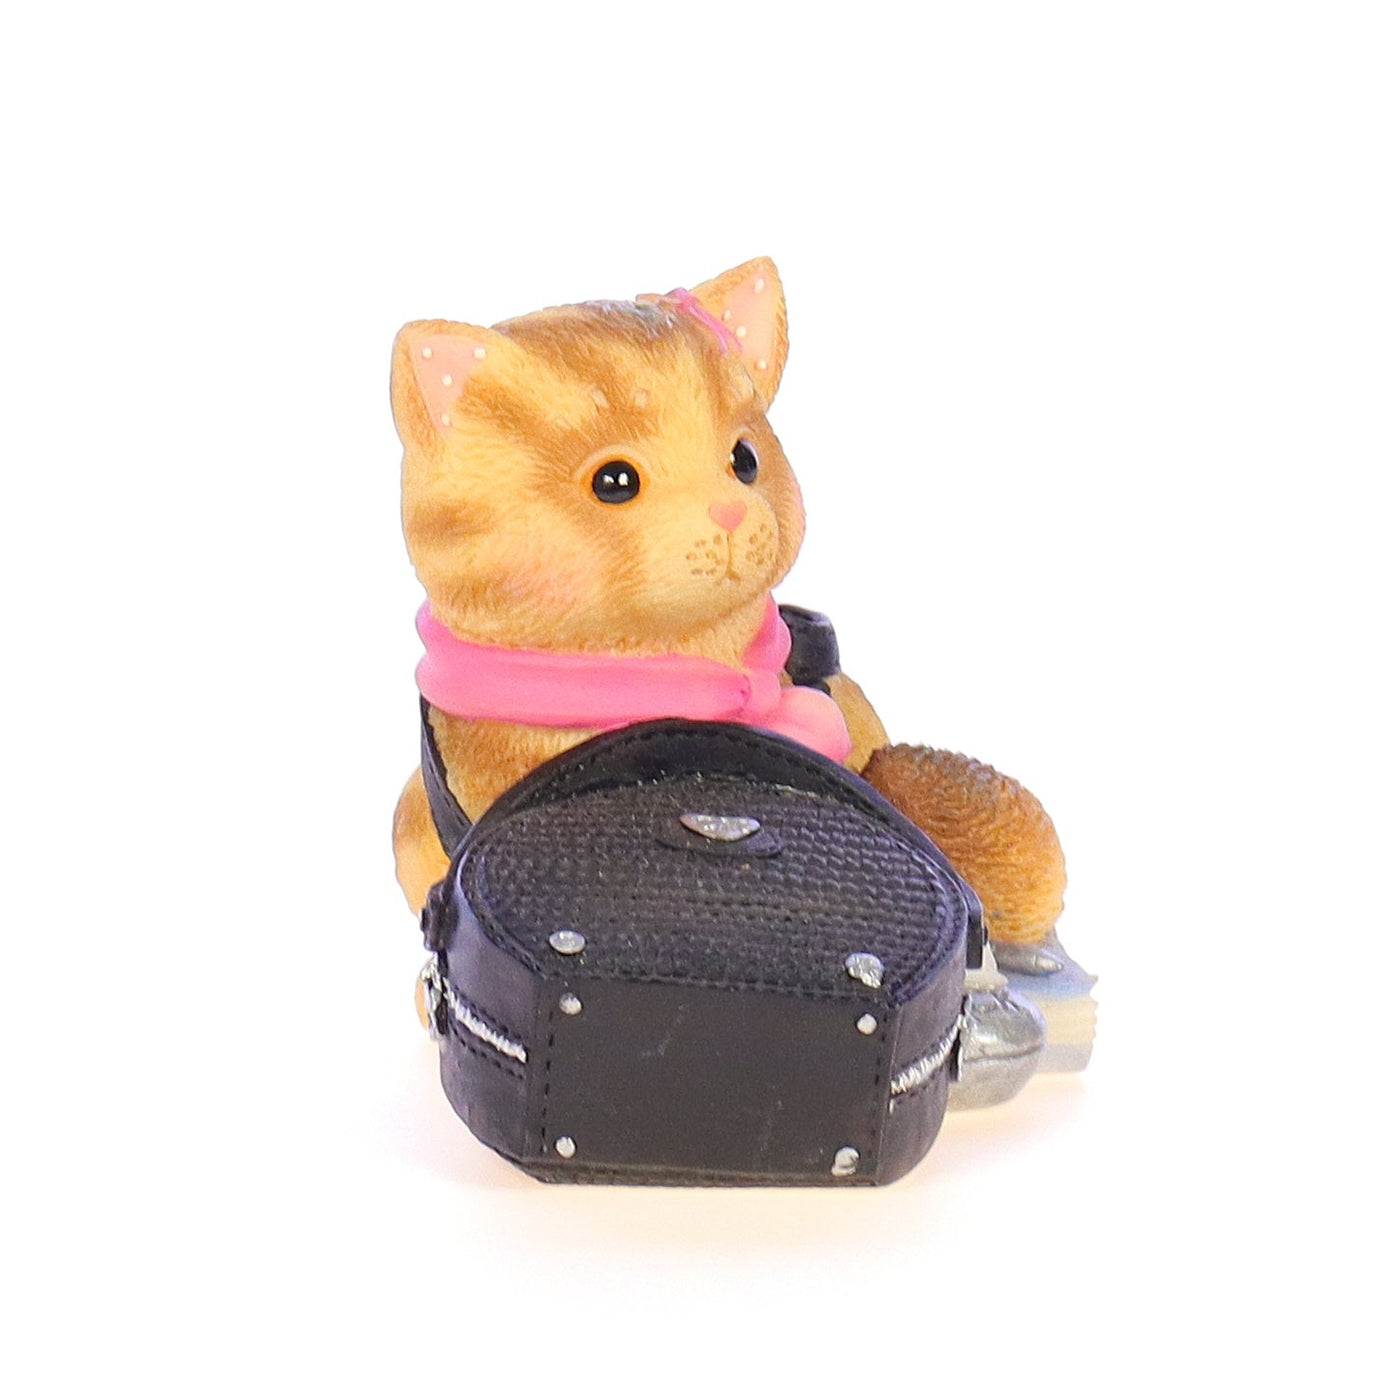 Calico_Kittens_My_Purr-suit_Of_Happiness_Led_To_You_Shopping_Figurine_1998